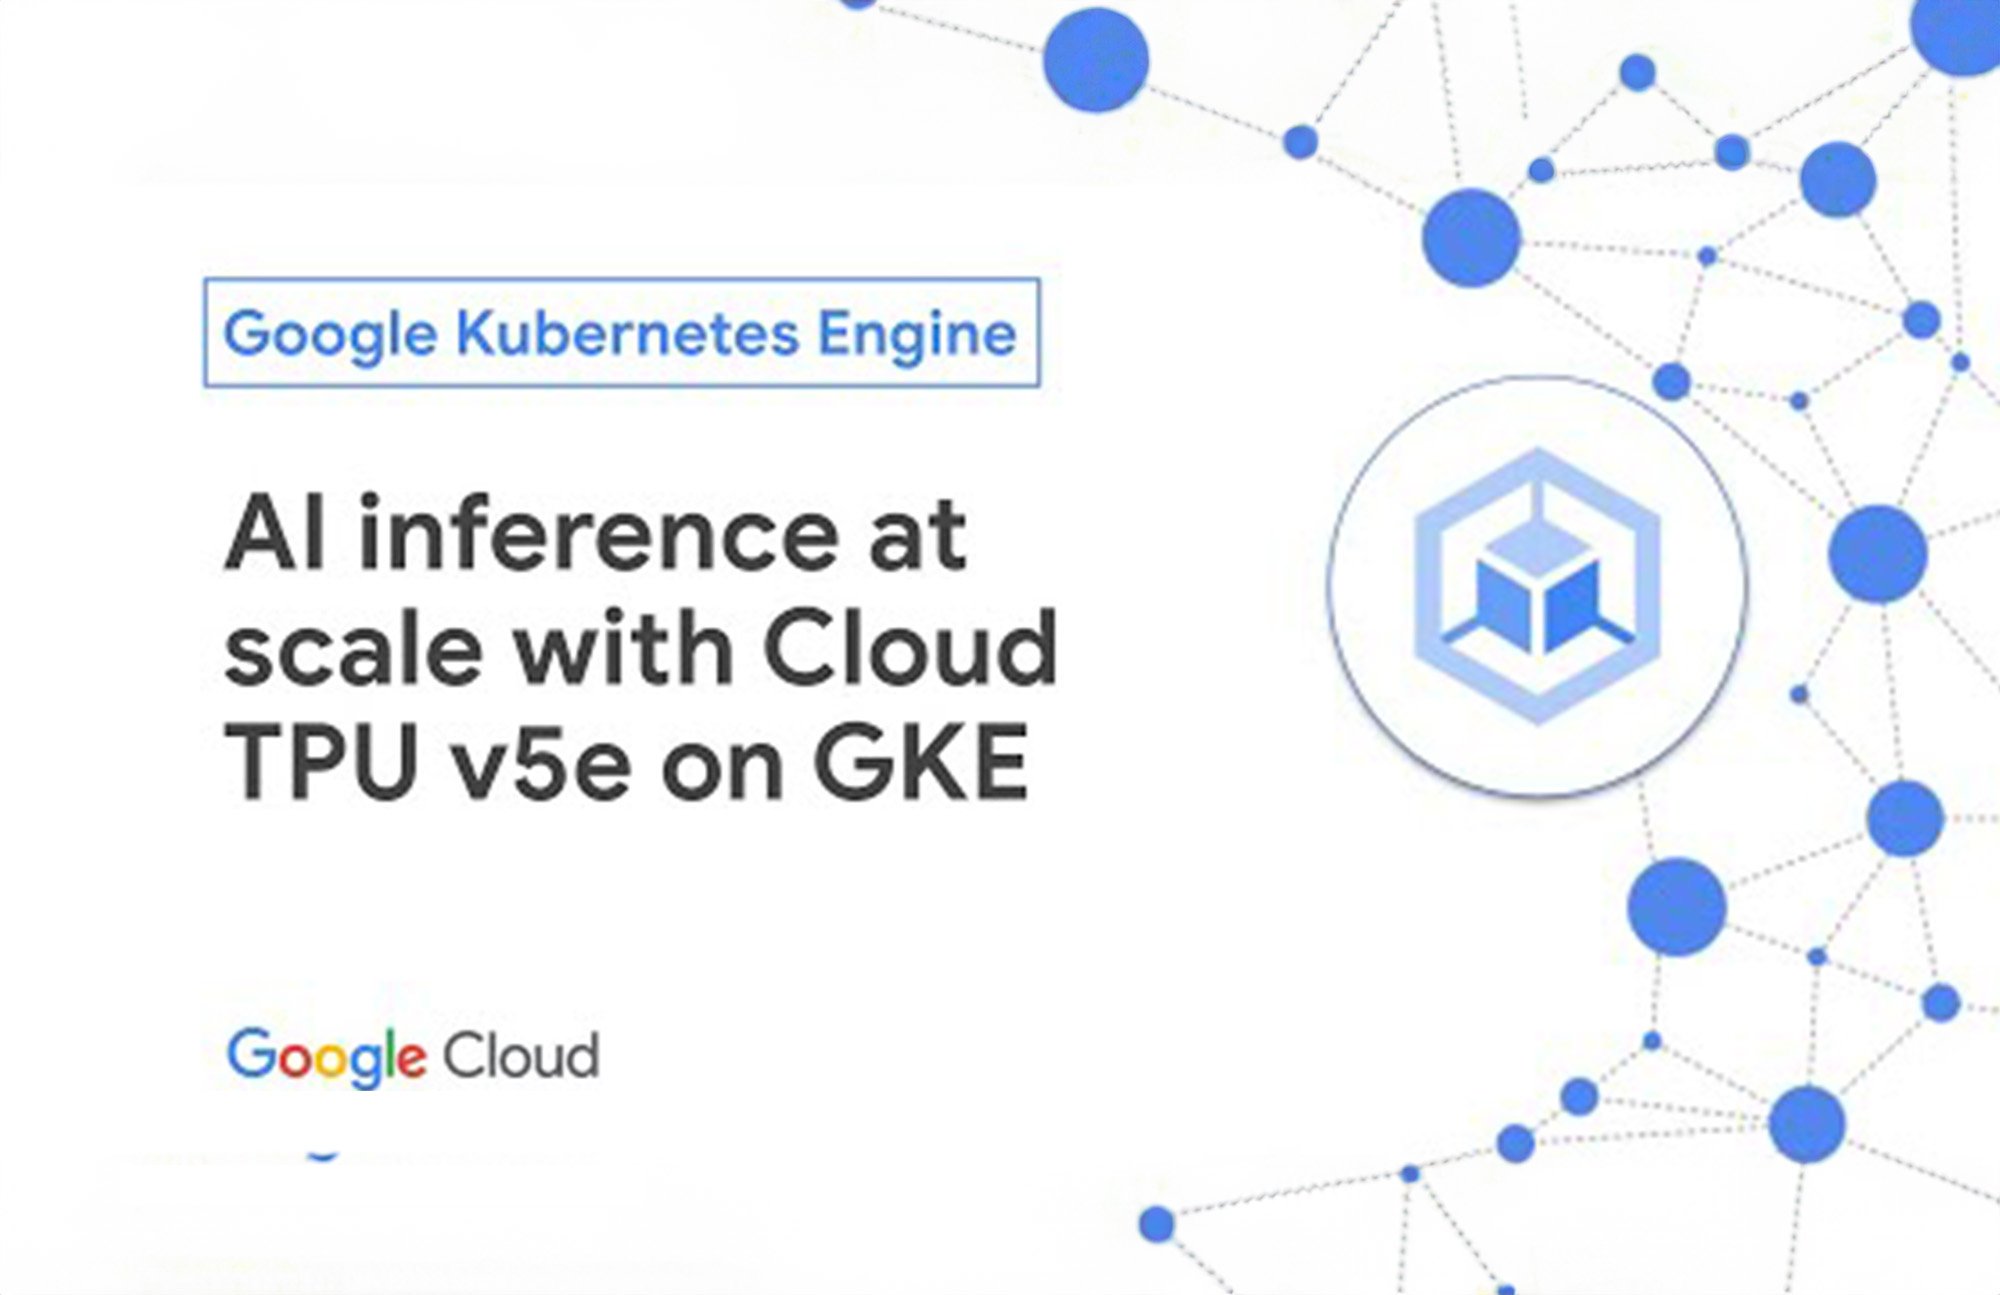 https://storage.googleapis.com/gweb-cloudblog-publish/images/AI_inference_at_scale_with_Cloud_TPU_v5e_o.max-2000x2000_eRKhzXo.jpg